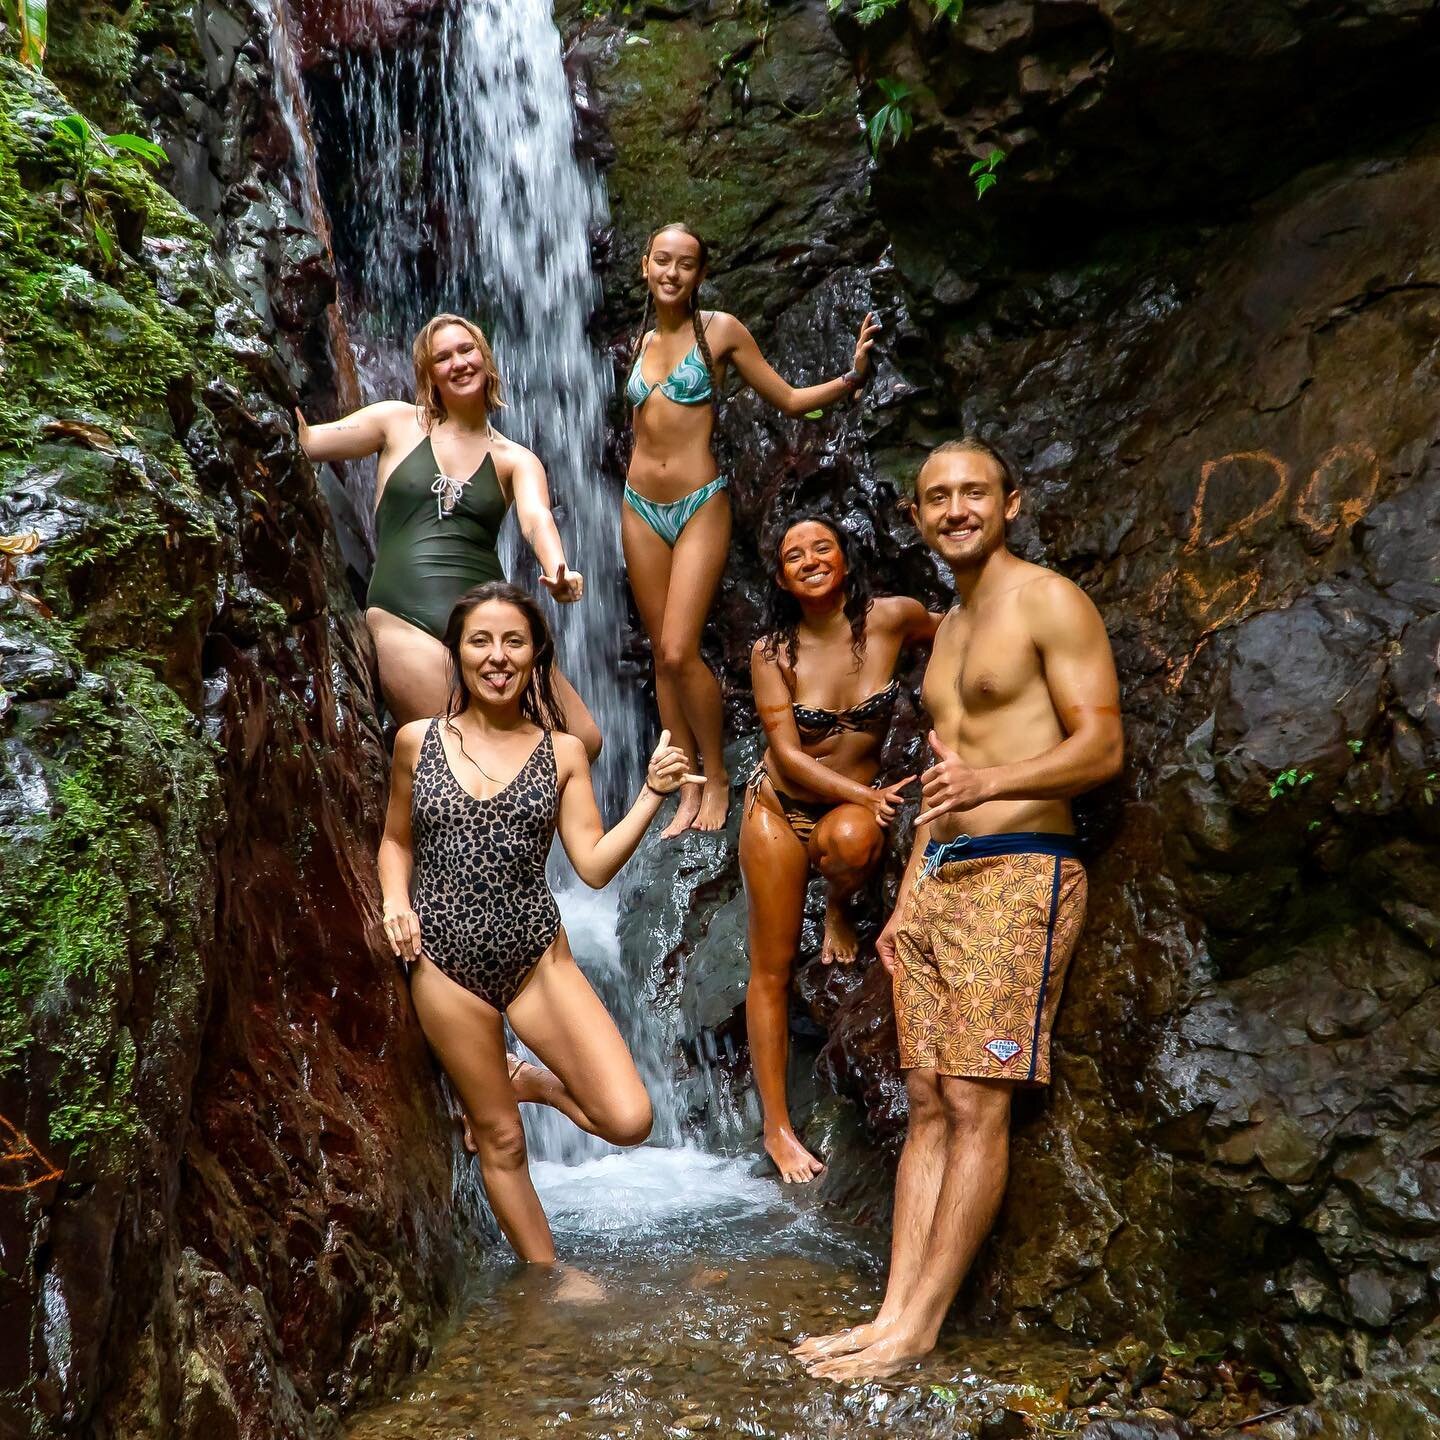 Refresh after a jungle hike 💦

These private waterfalls are available for our guests to visit 💙

Dm us to book your stay or day tour!

#piedrasblancasnationalpark #extremehike #junglelodge #dolphinquestcostarica #waterfallhike